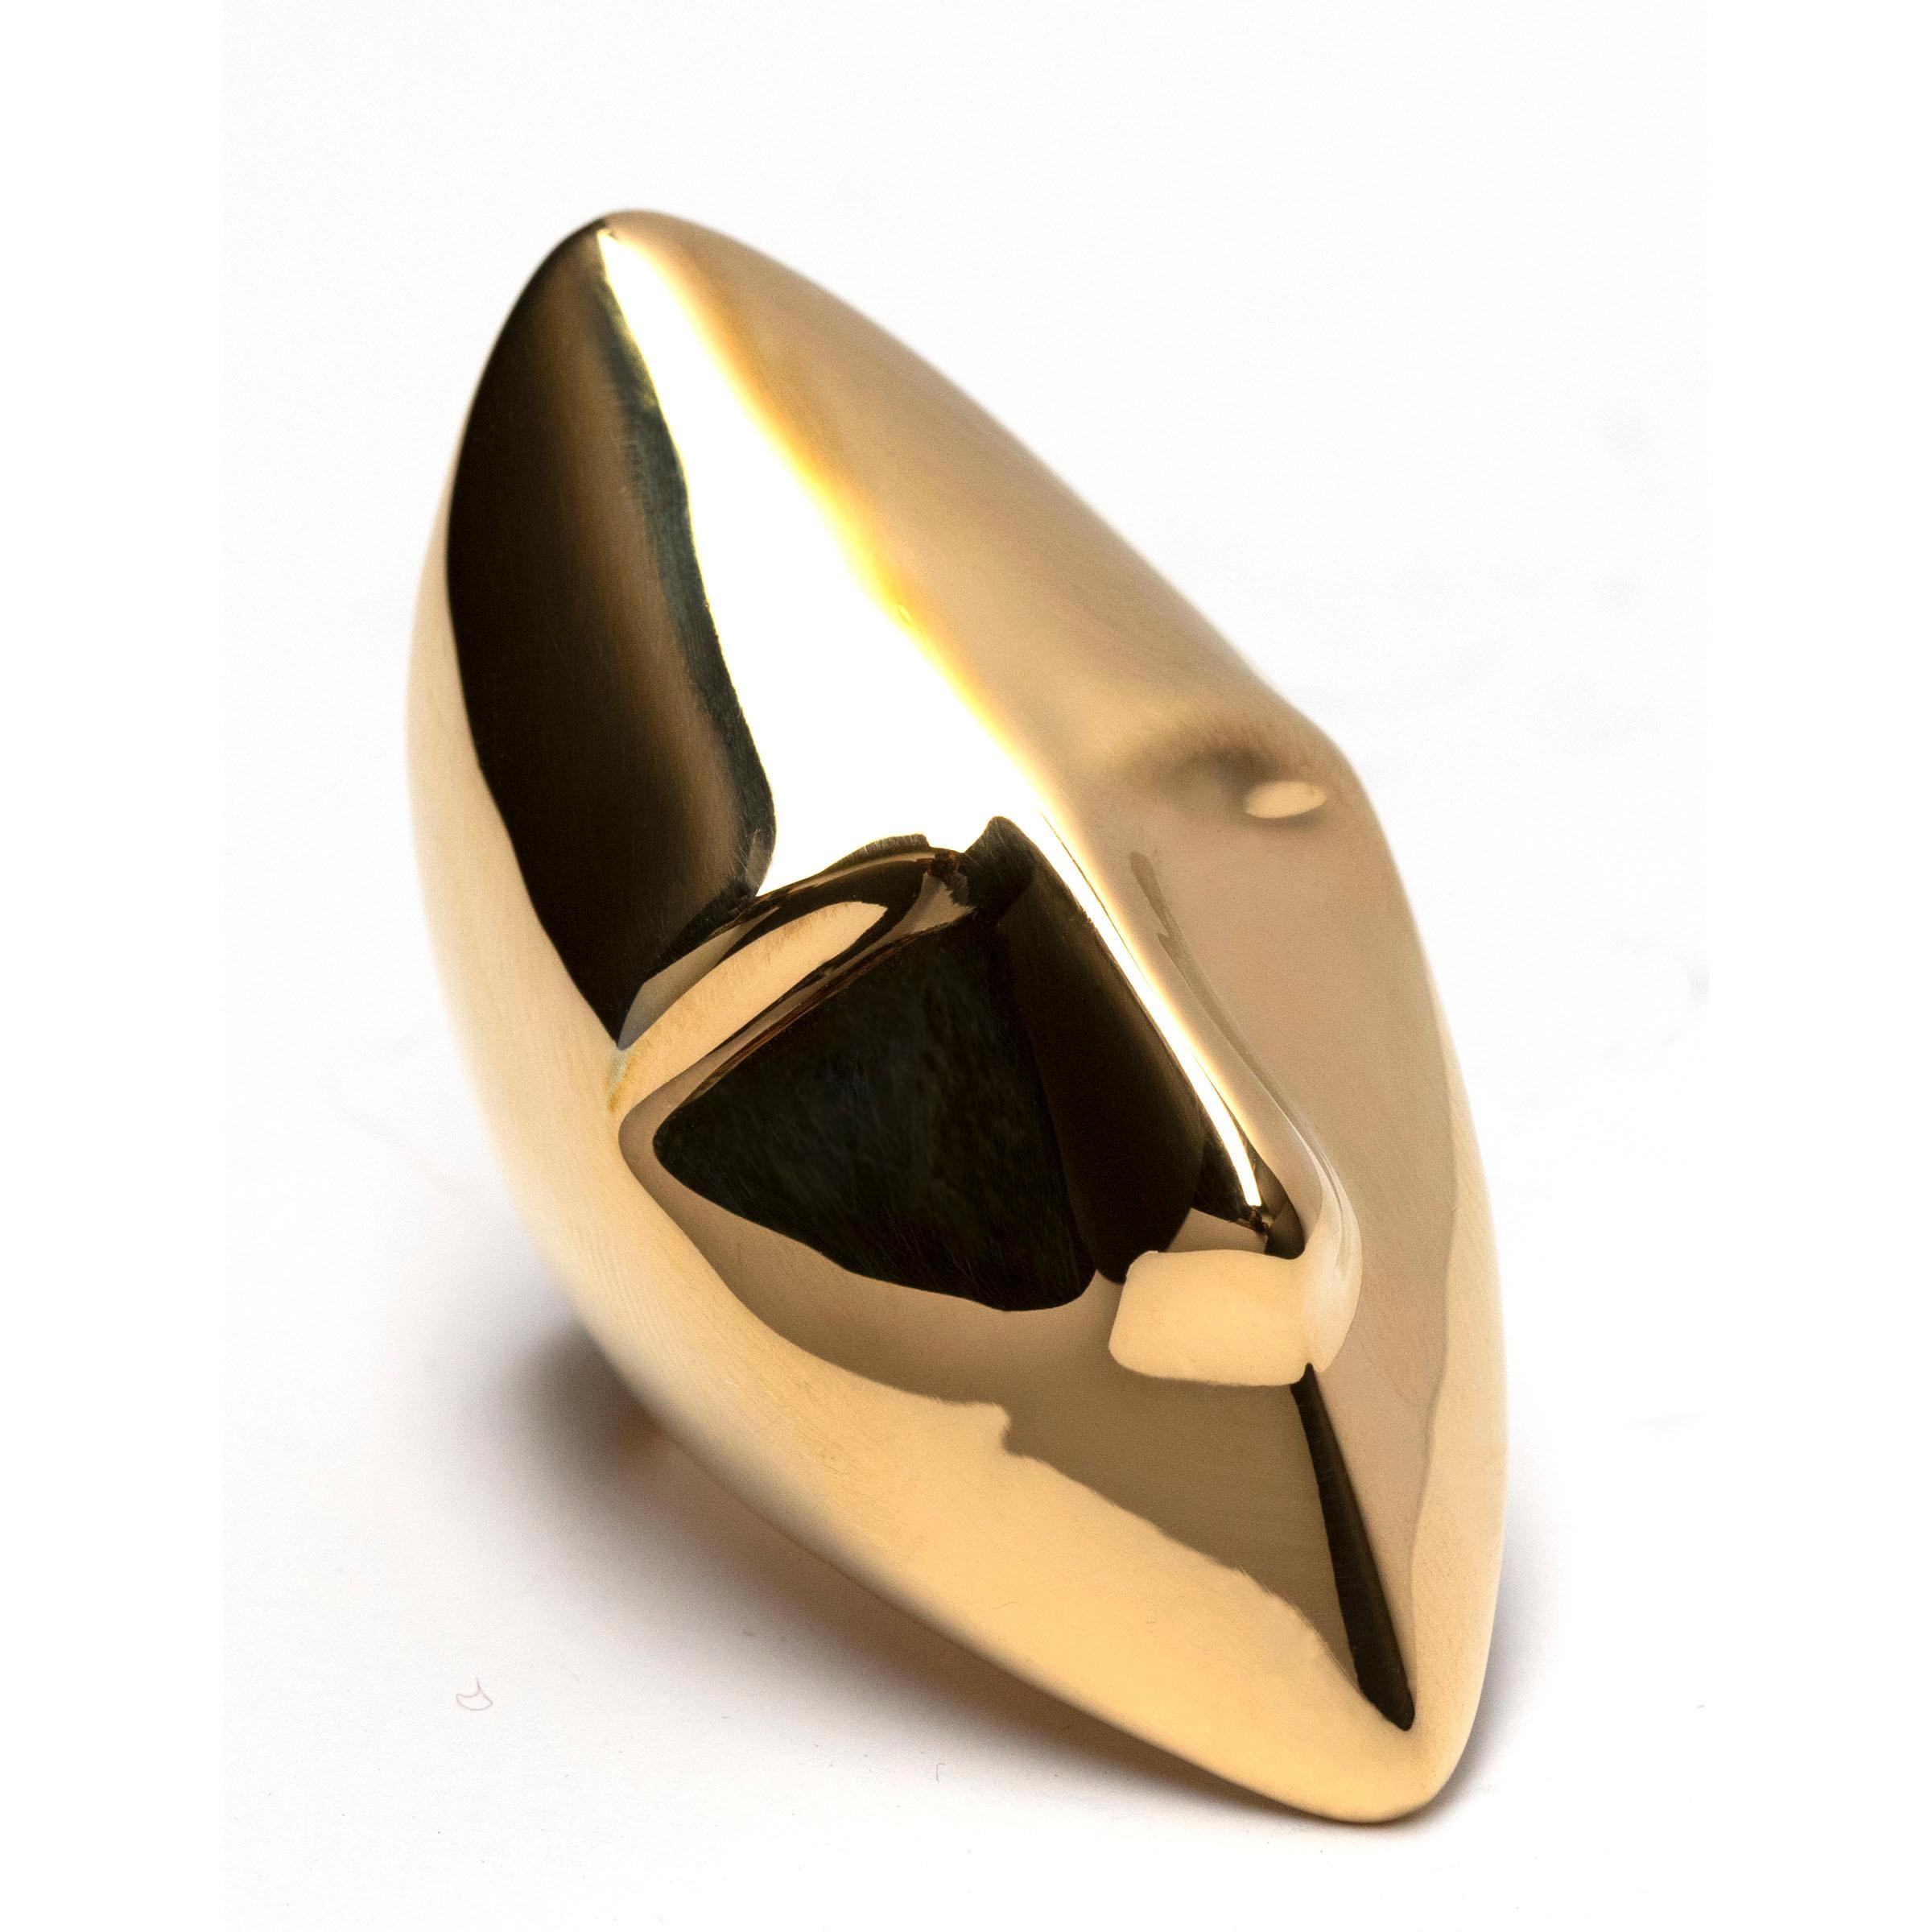 For Sale:  Brenna Colvin, Face Ring, 24k Gold Plated Sterling Silver 2